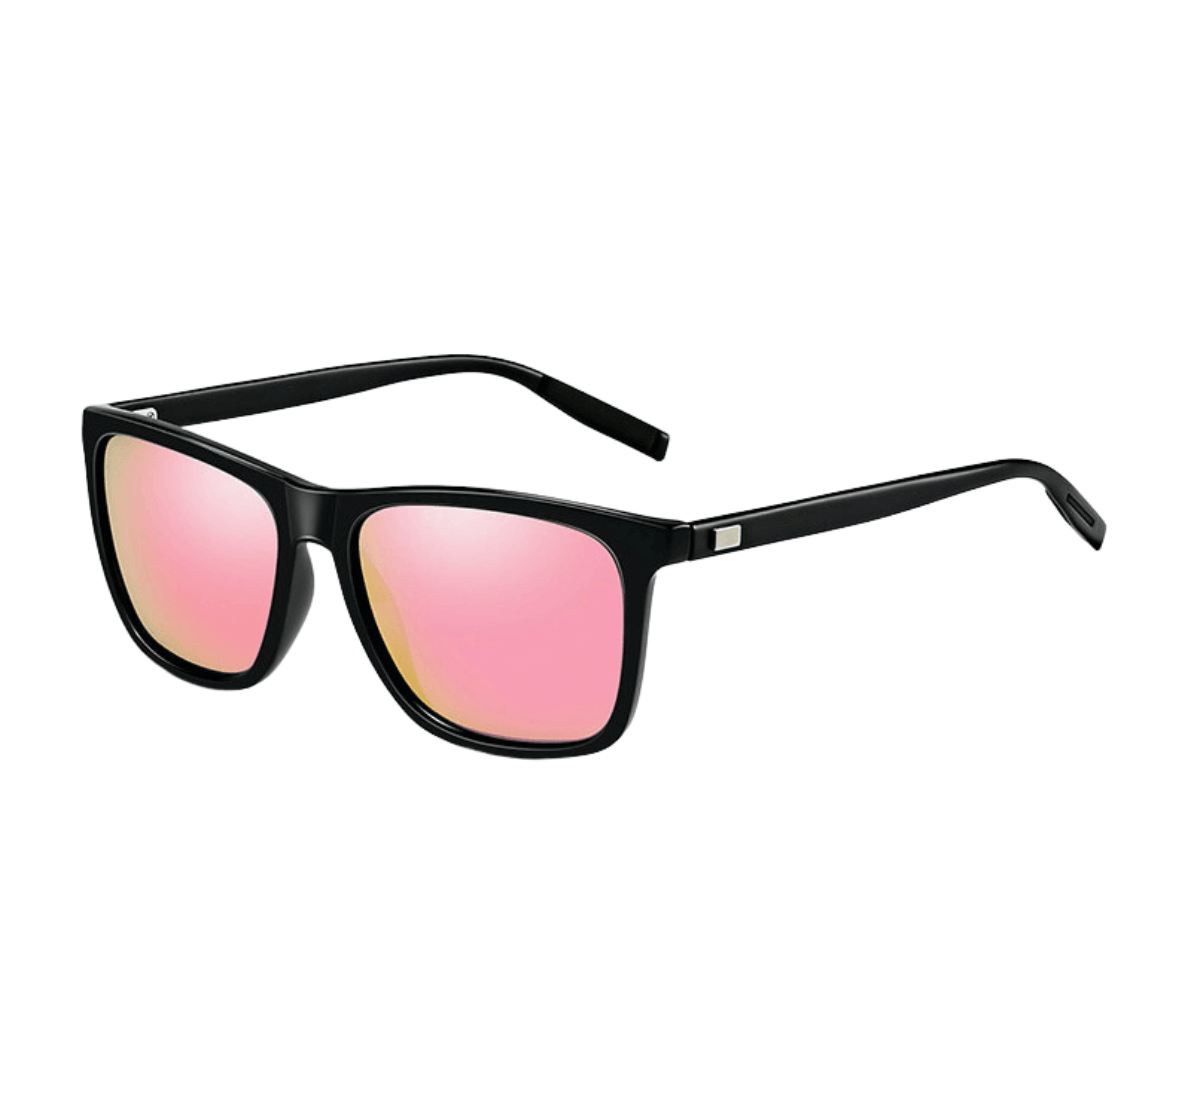 Wholesale Sunglasses Supplier and Manufacturer in China